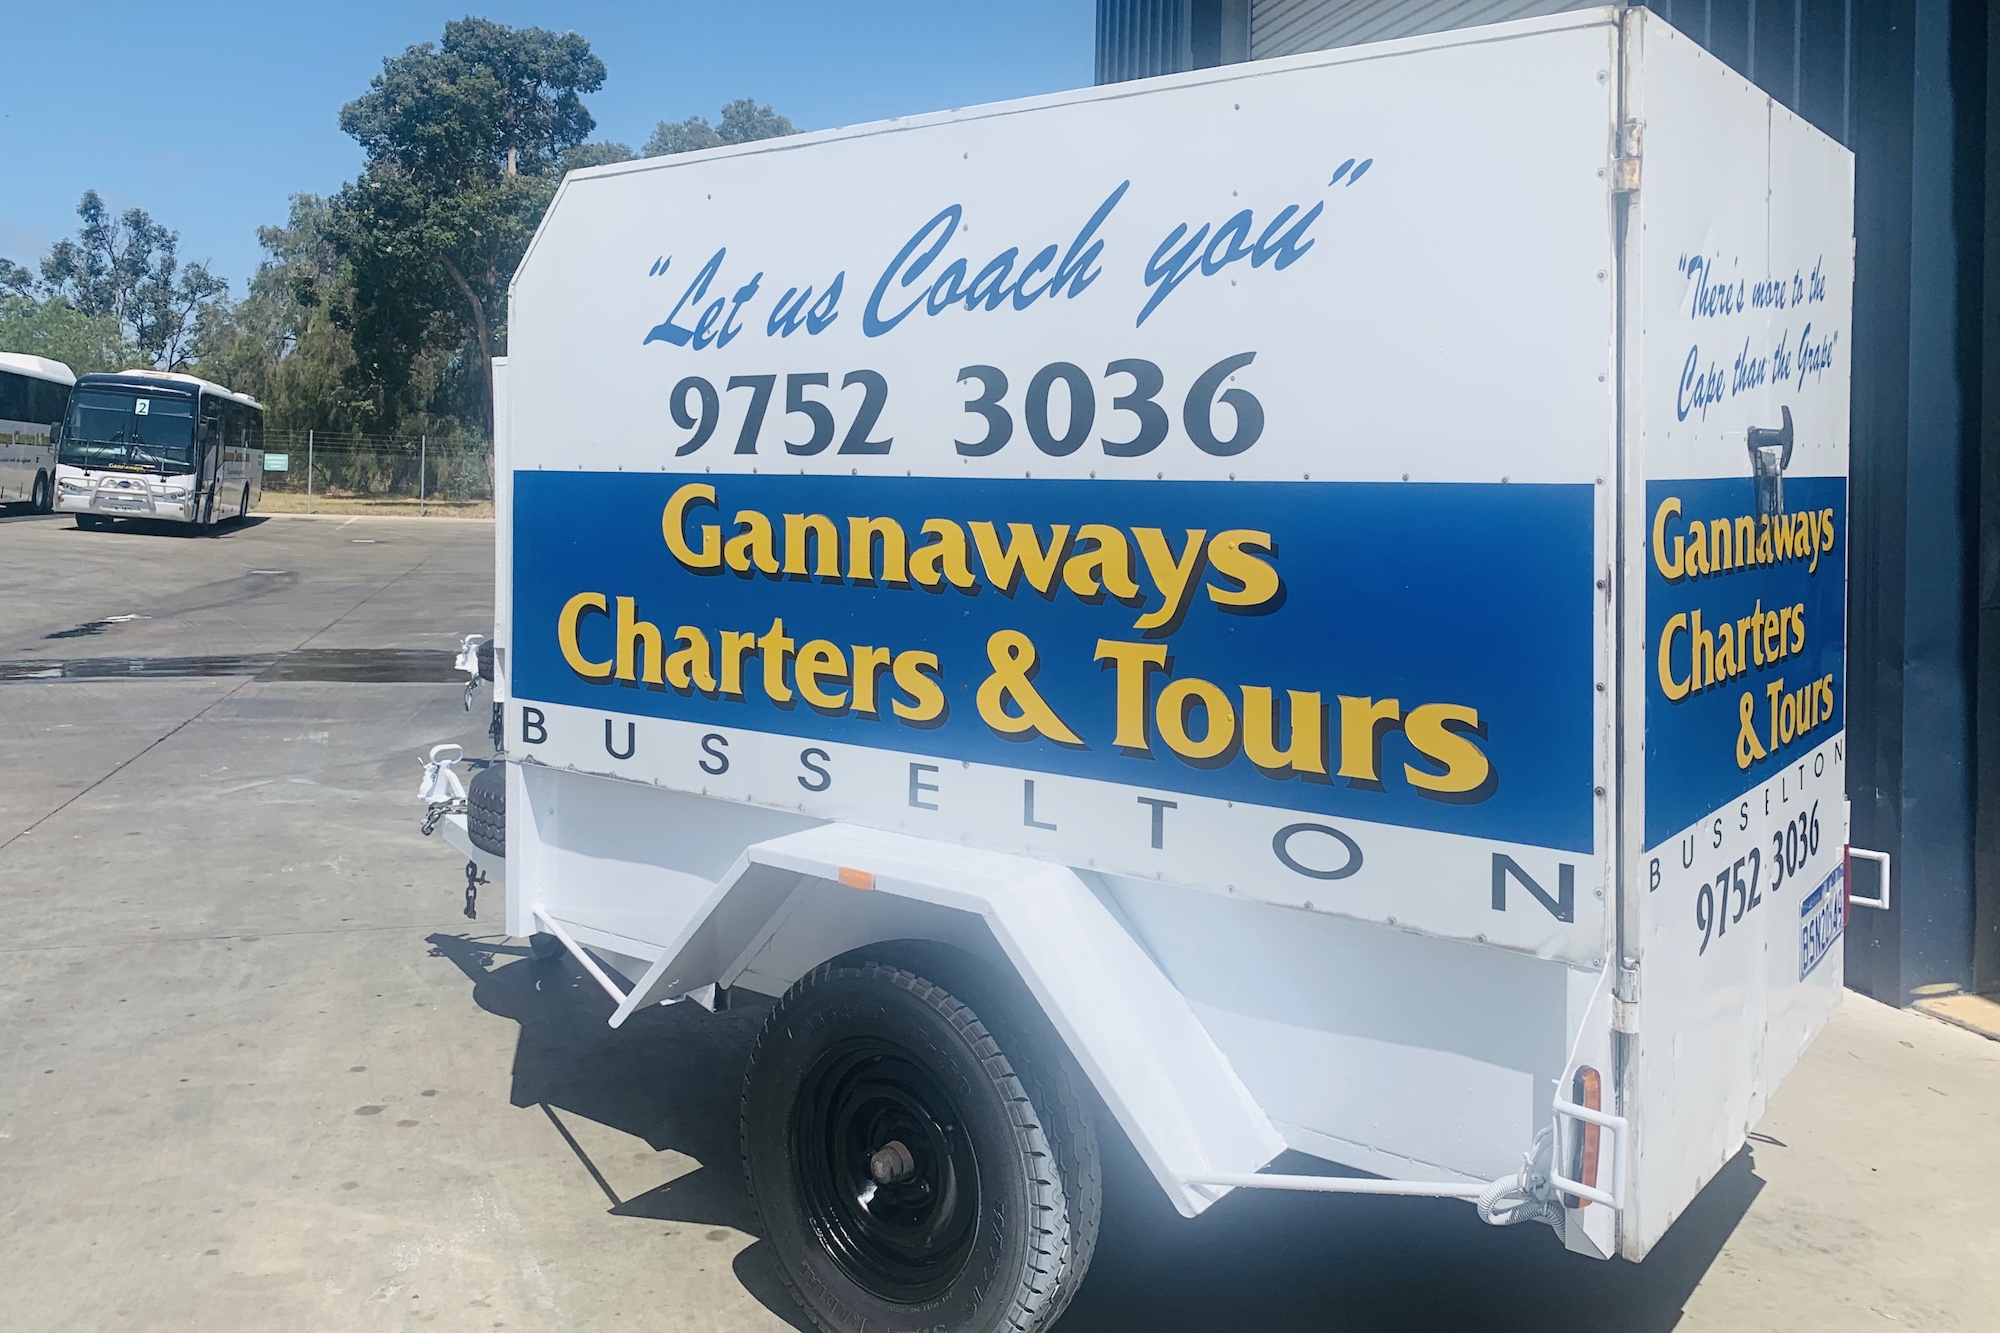 Gananways Charters and Tours